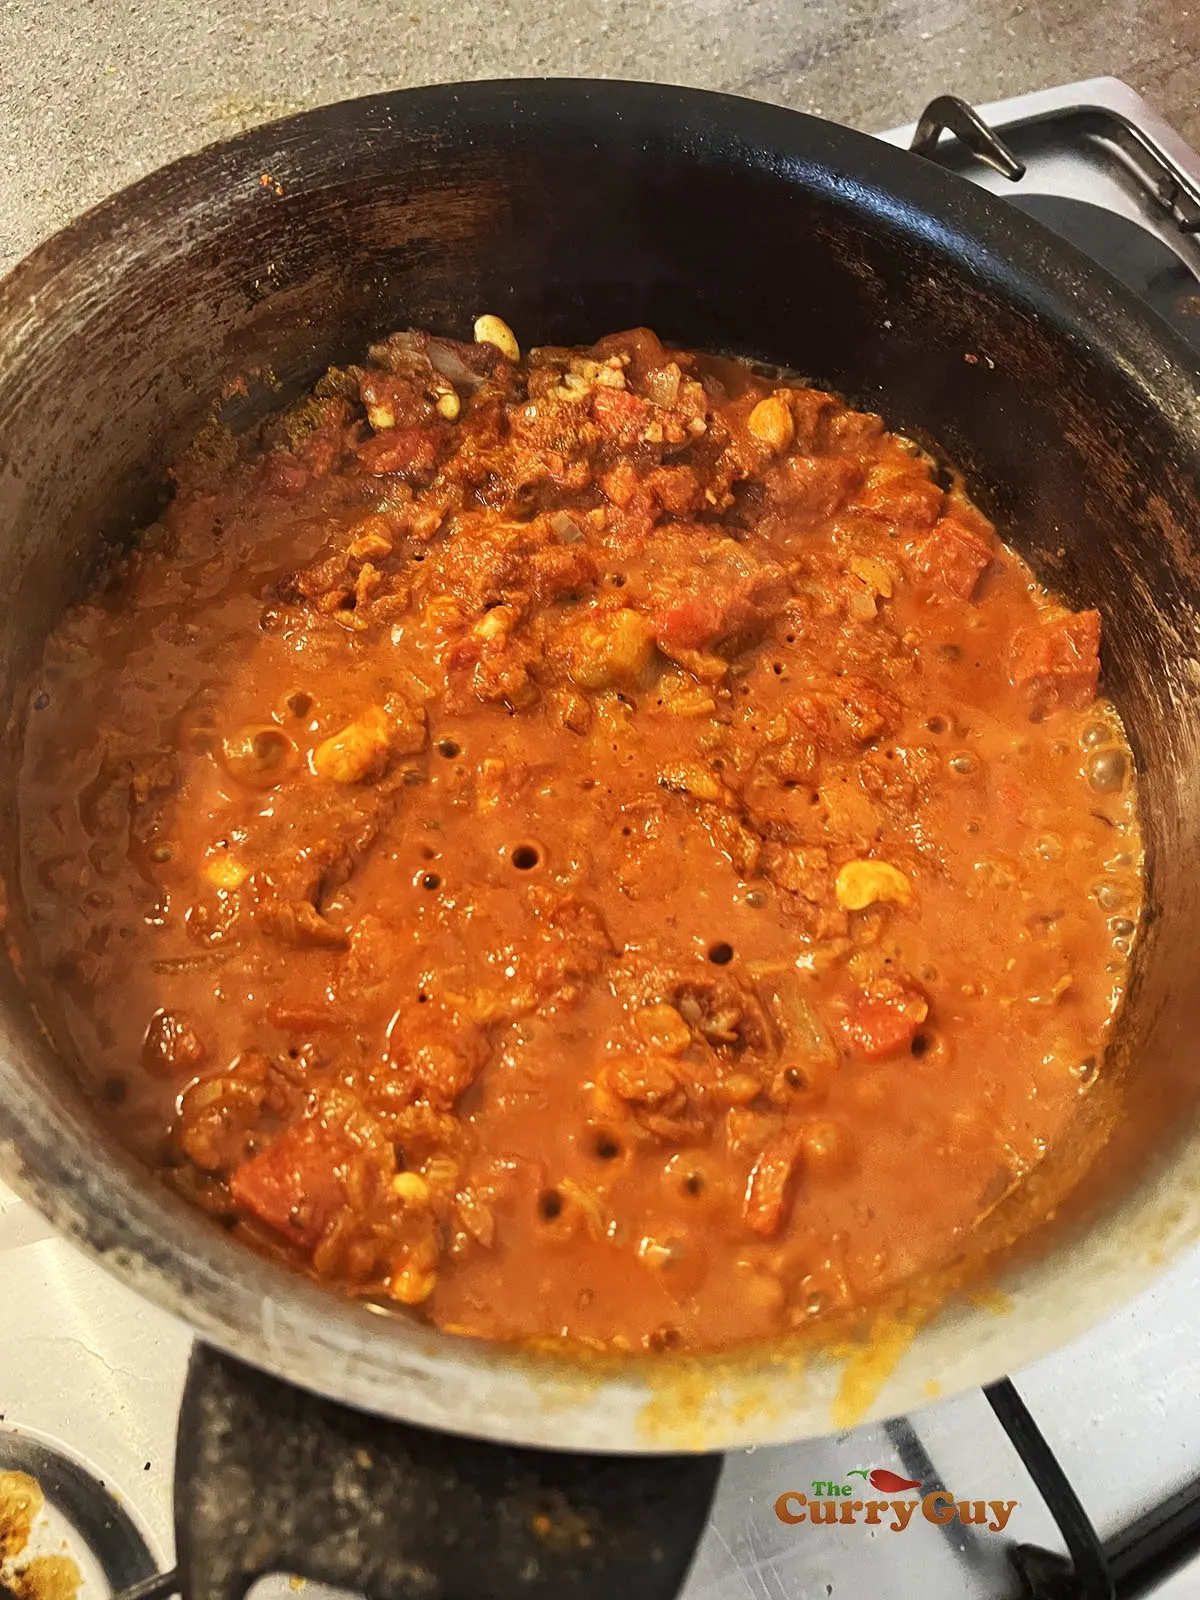 Adding chopped tomatoes and stock to the pan